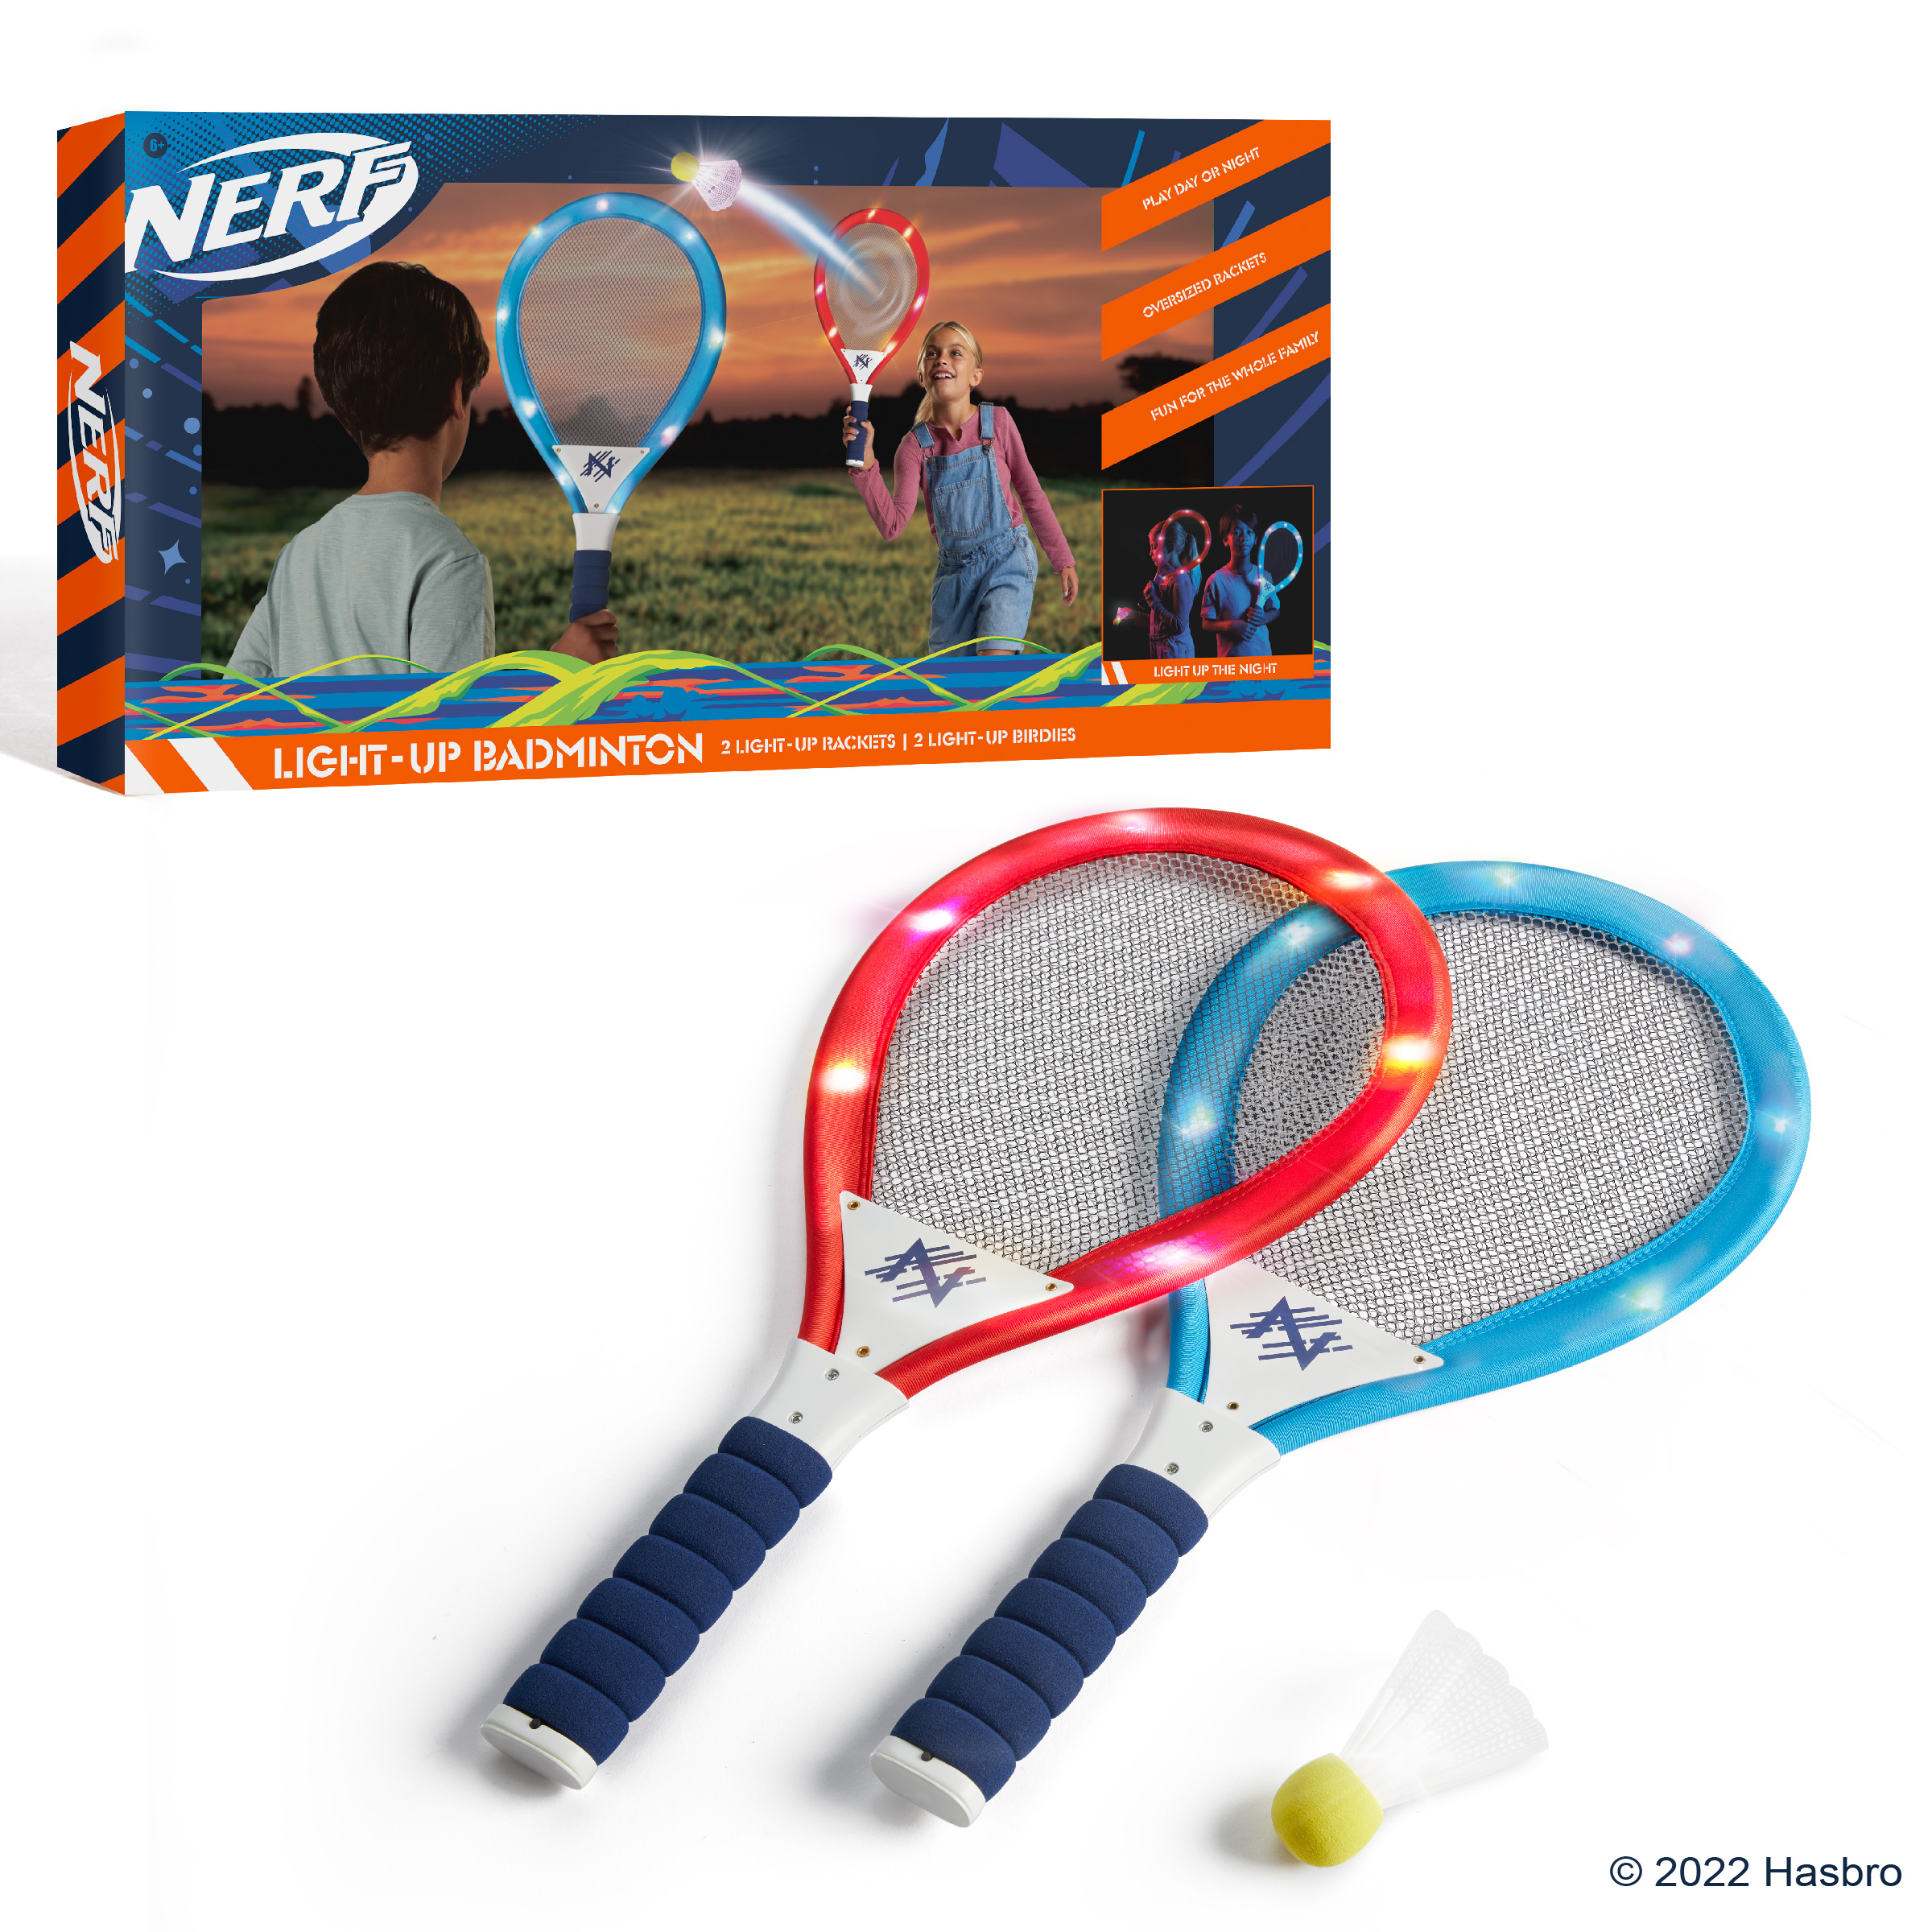 Nerf Outdoor Badminton at Lowes